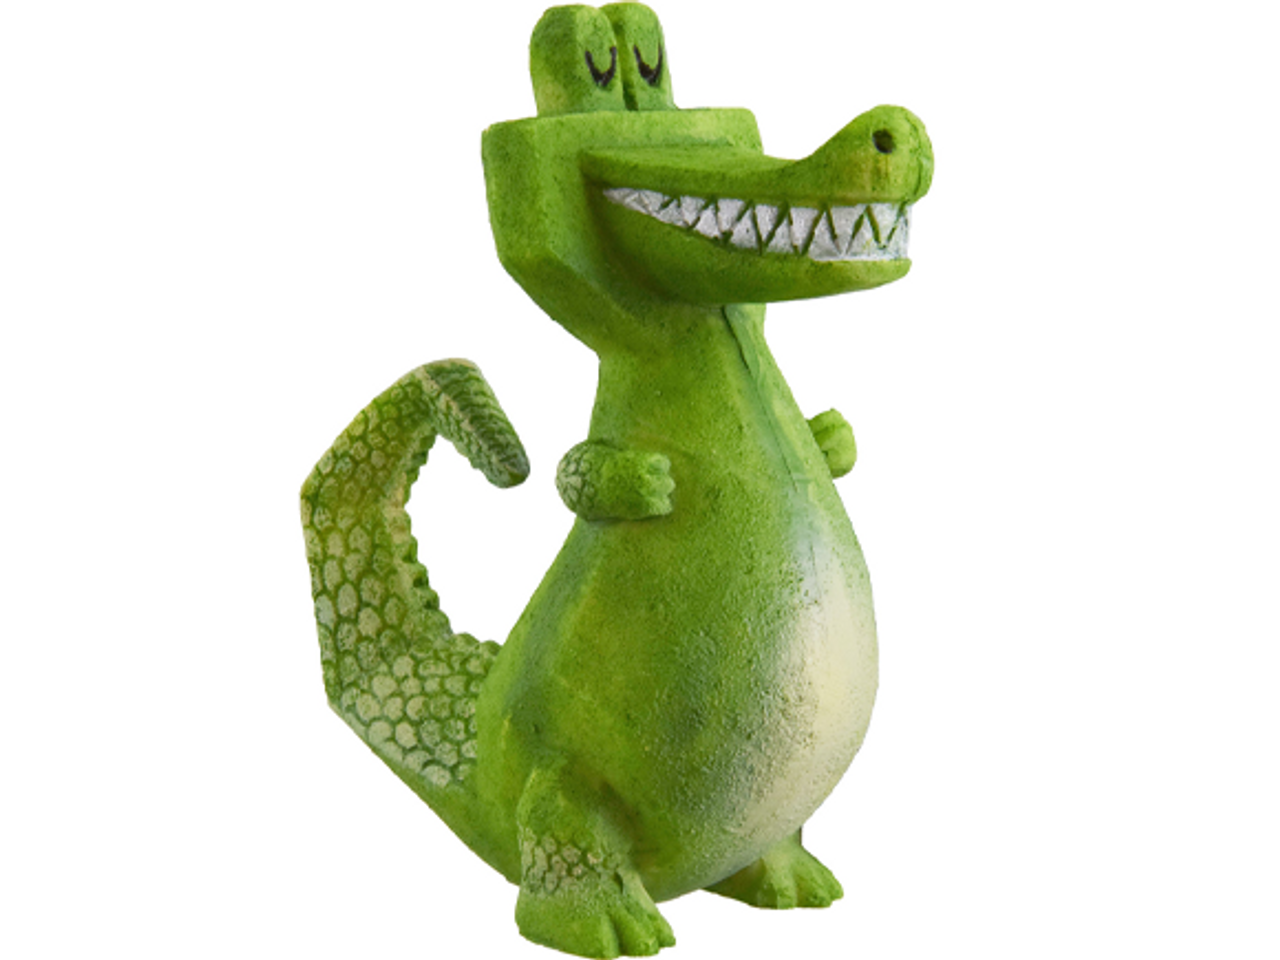 Bright Green Gator, Natural Selections Inc, Wholesale Toys